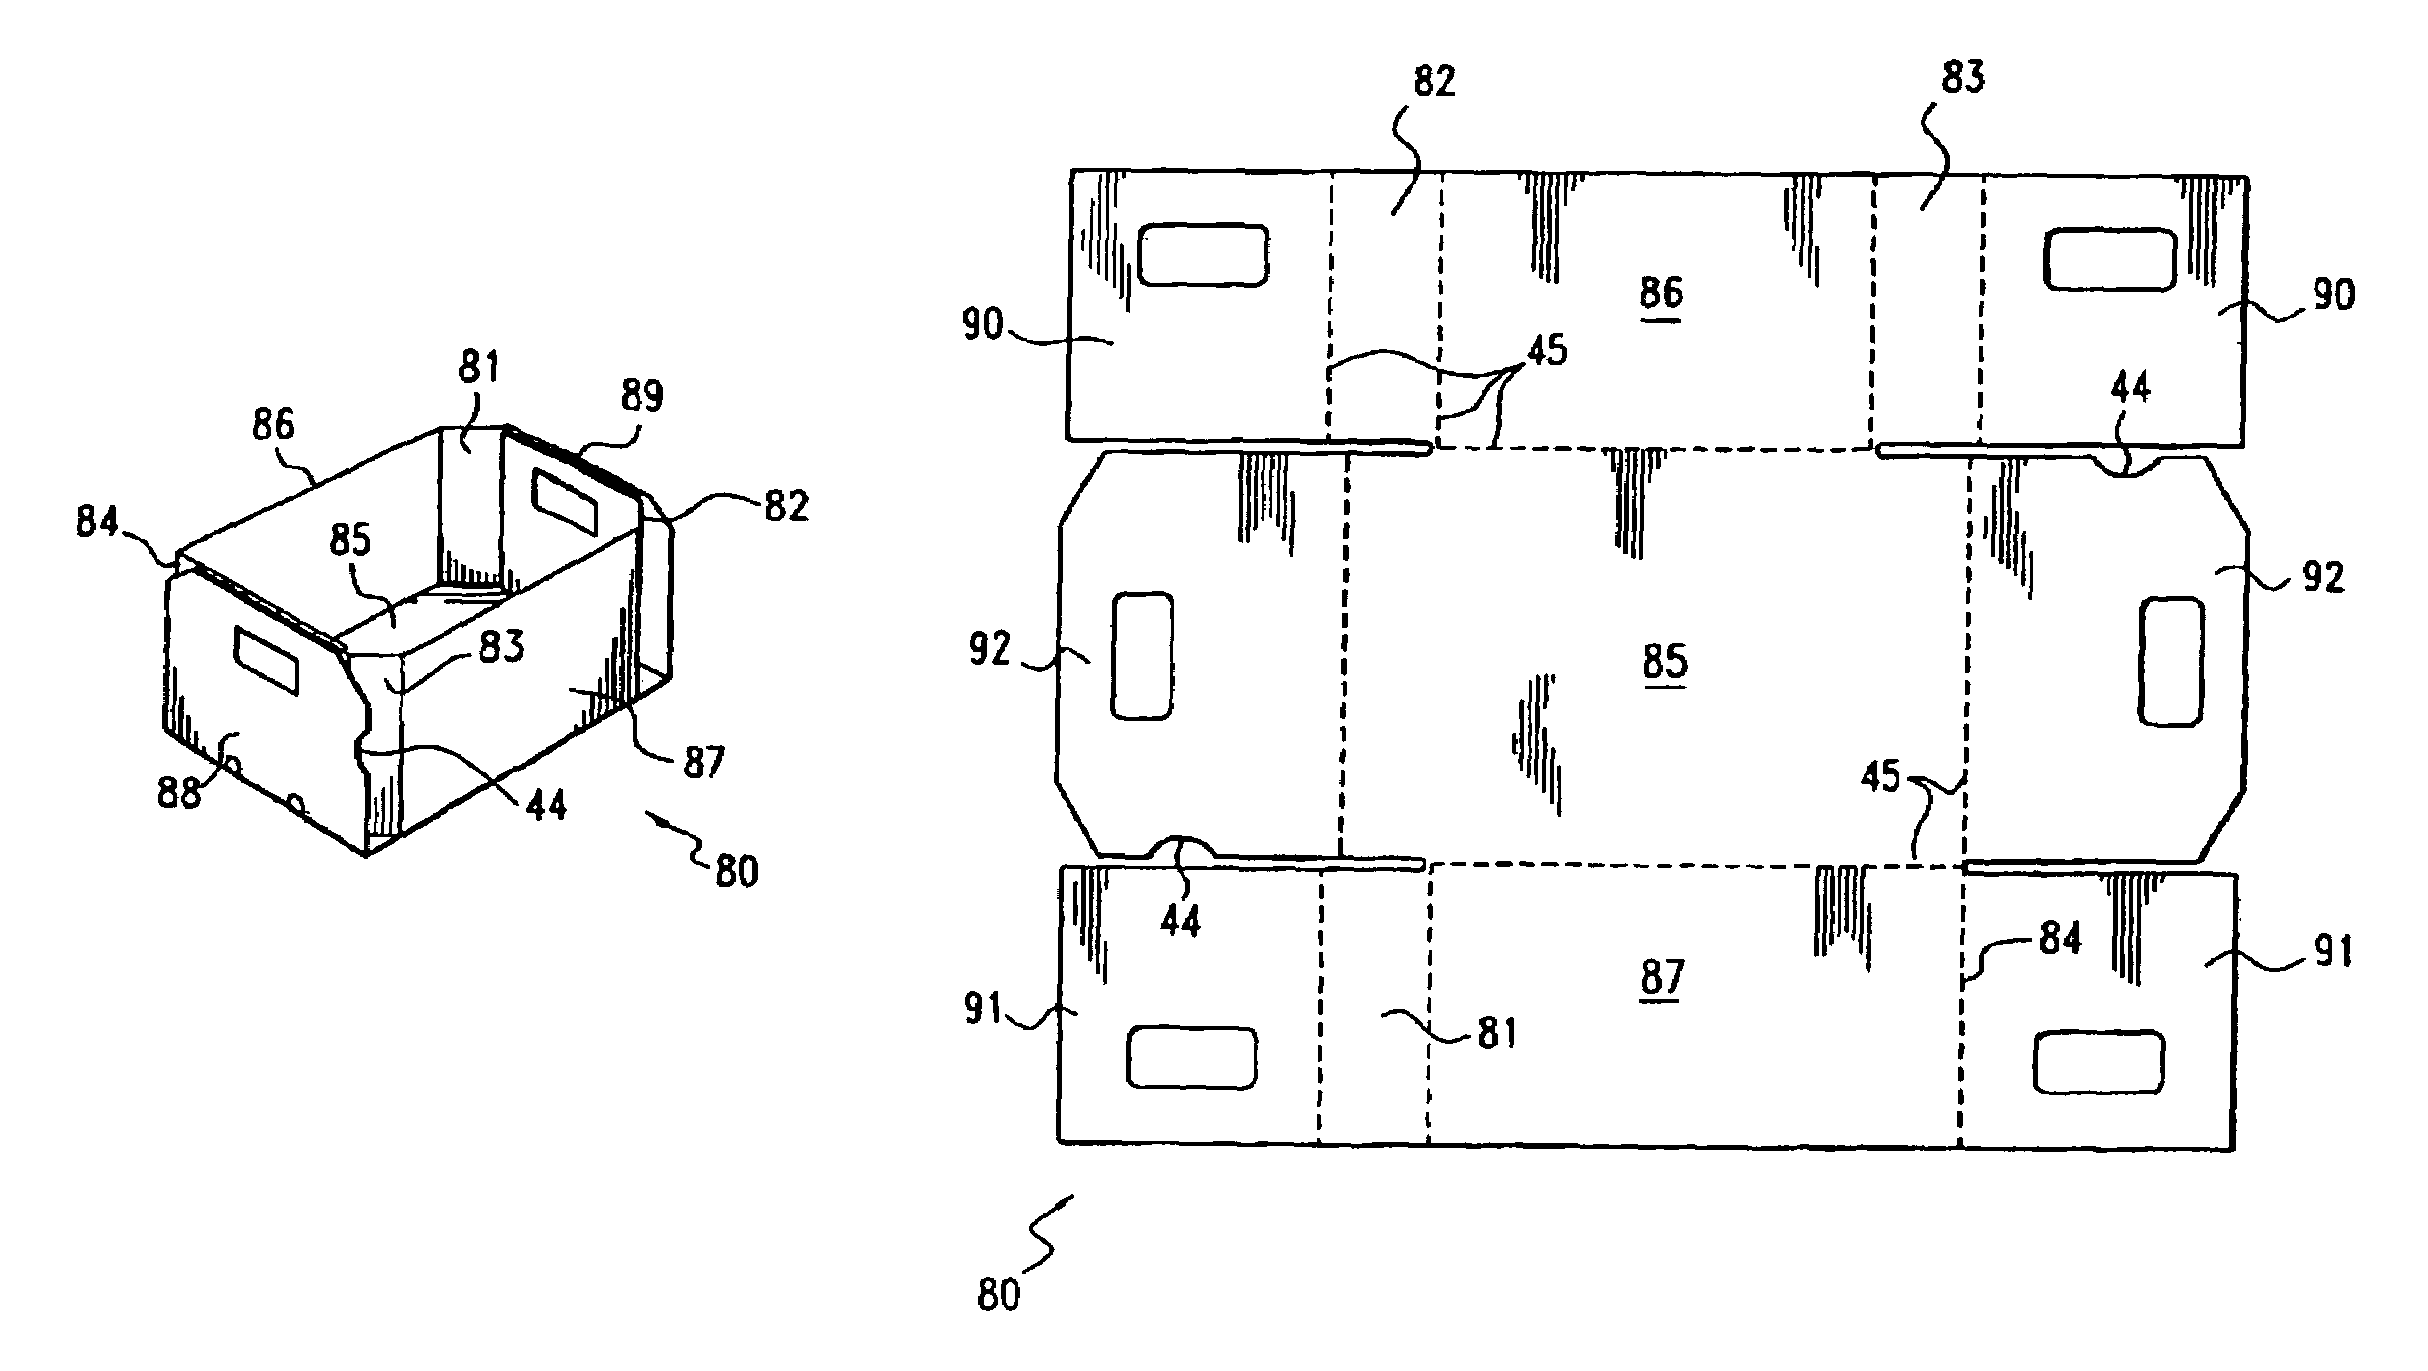 Container with improved stacking strength and resistance to lateral distortion